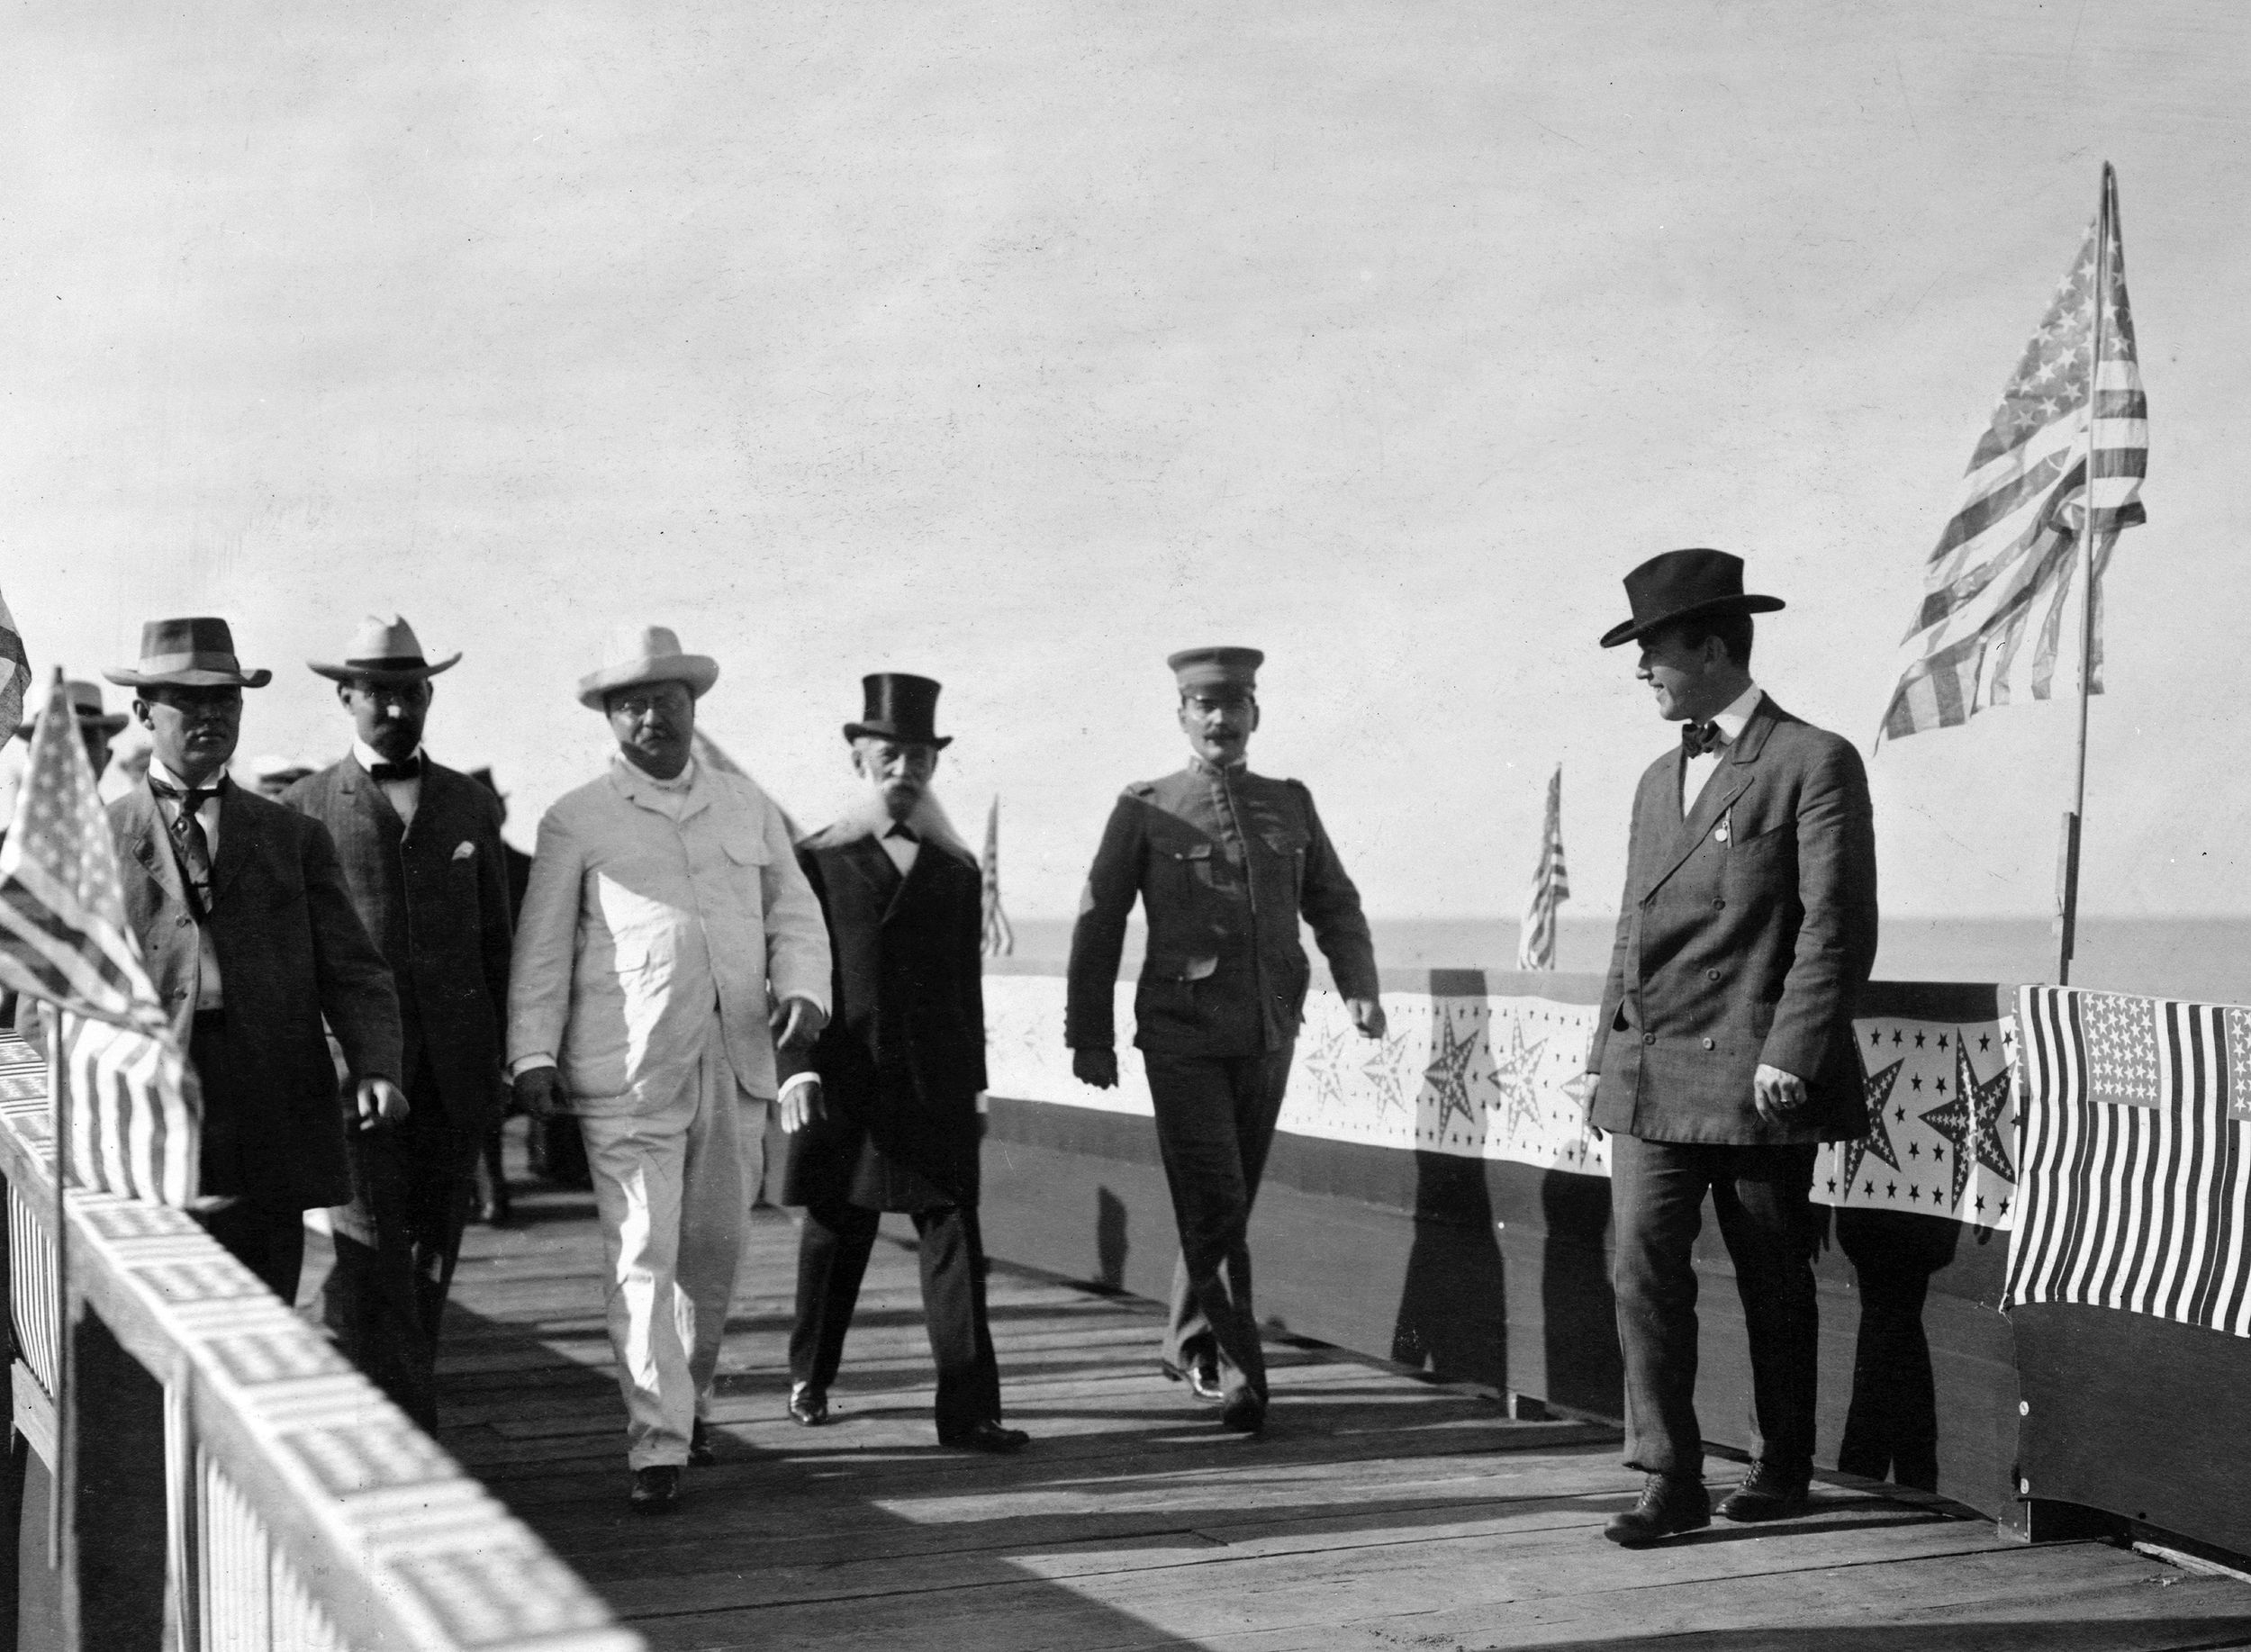 President Theodore Roosevelt leads a gaggle of soldiers and diplomats on an impromptu inspection of the American fleet.